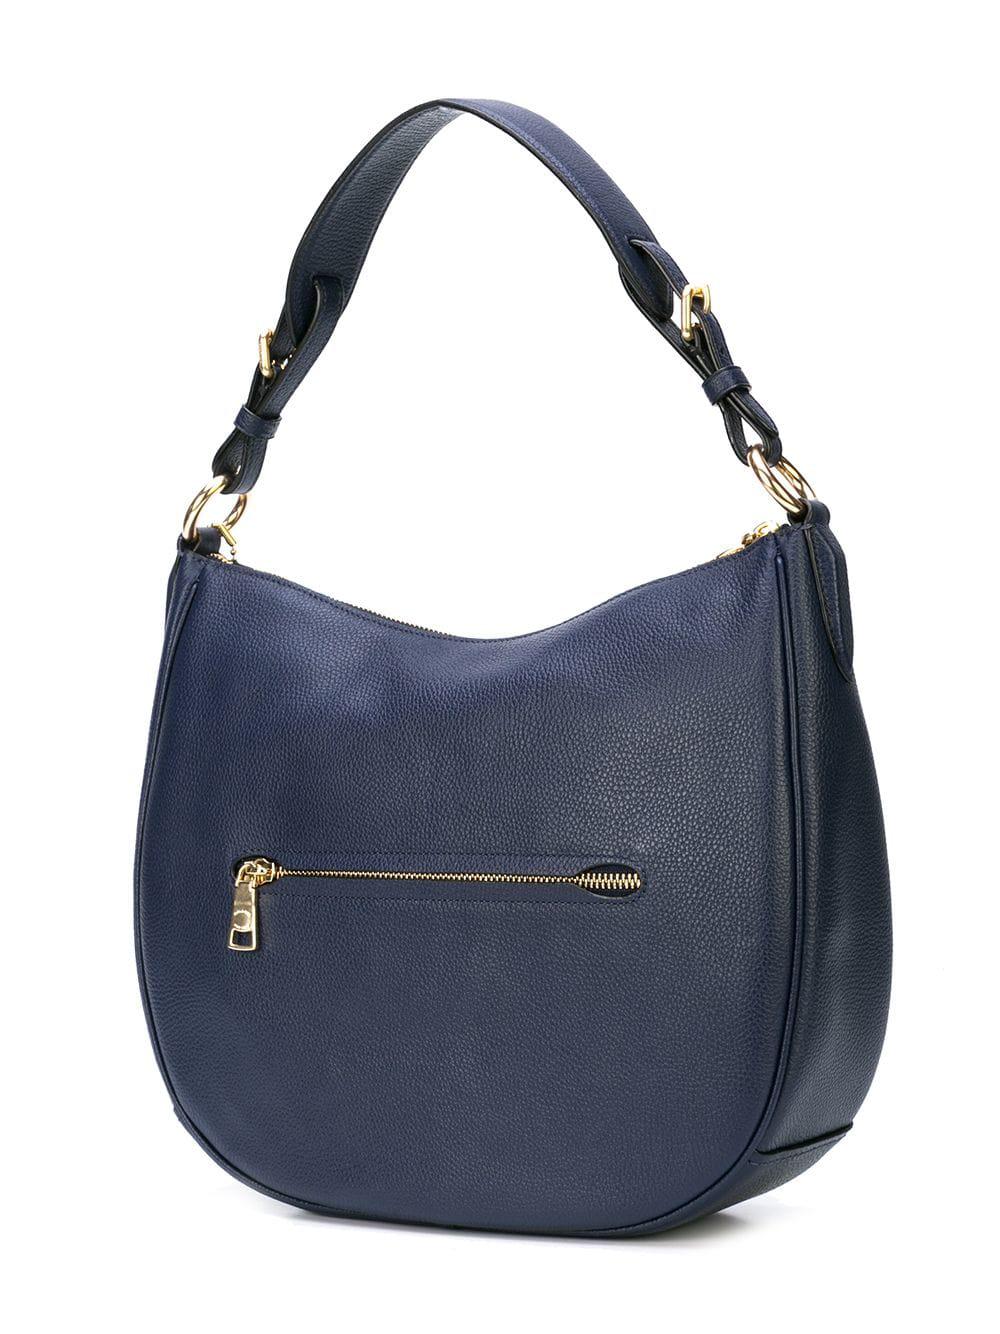 COACH Sutton Pebbled Leather Hobo Bag in Blue - Lyst